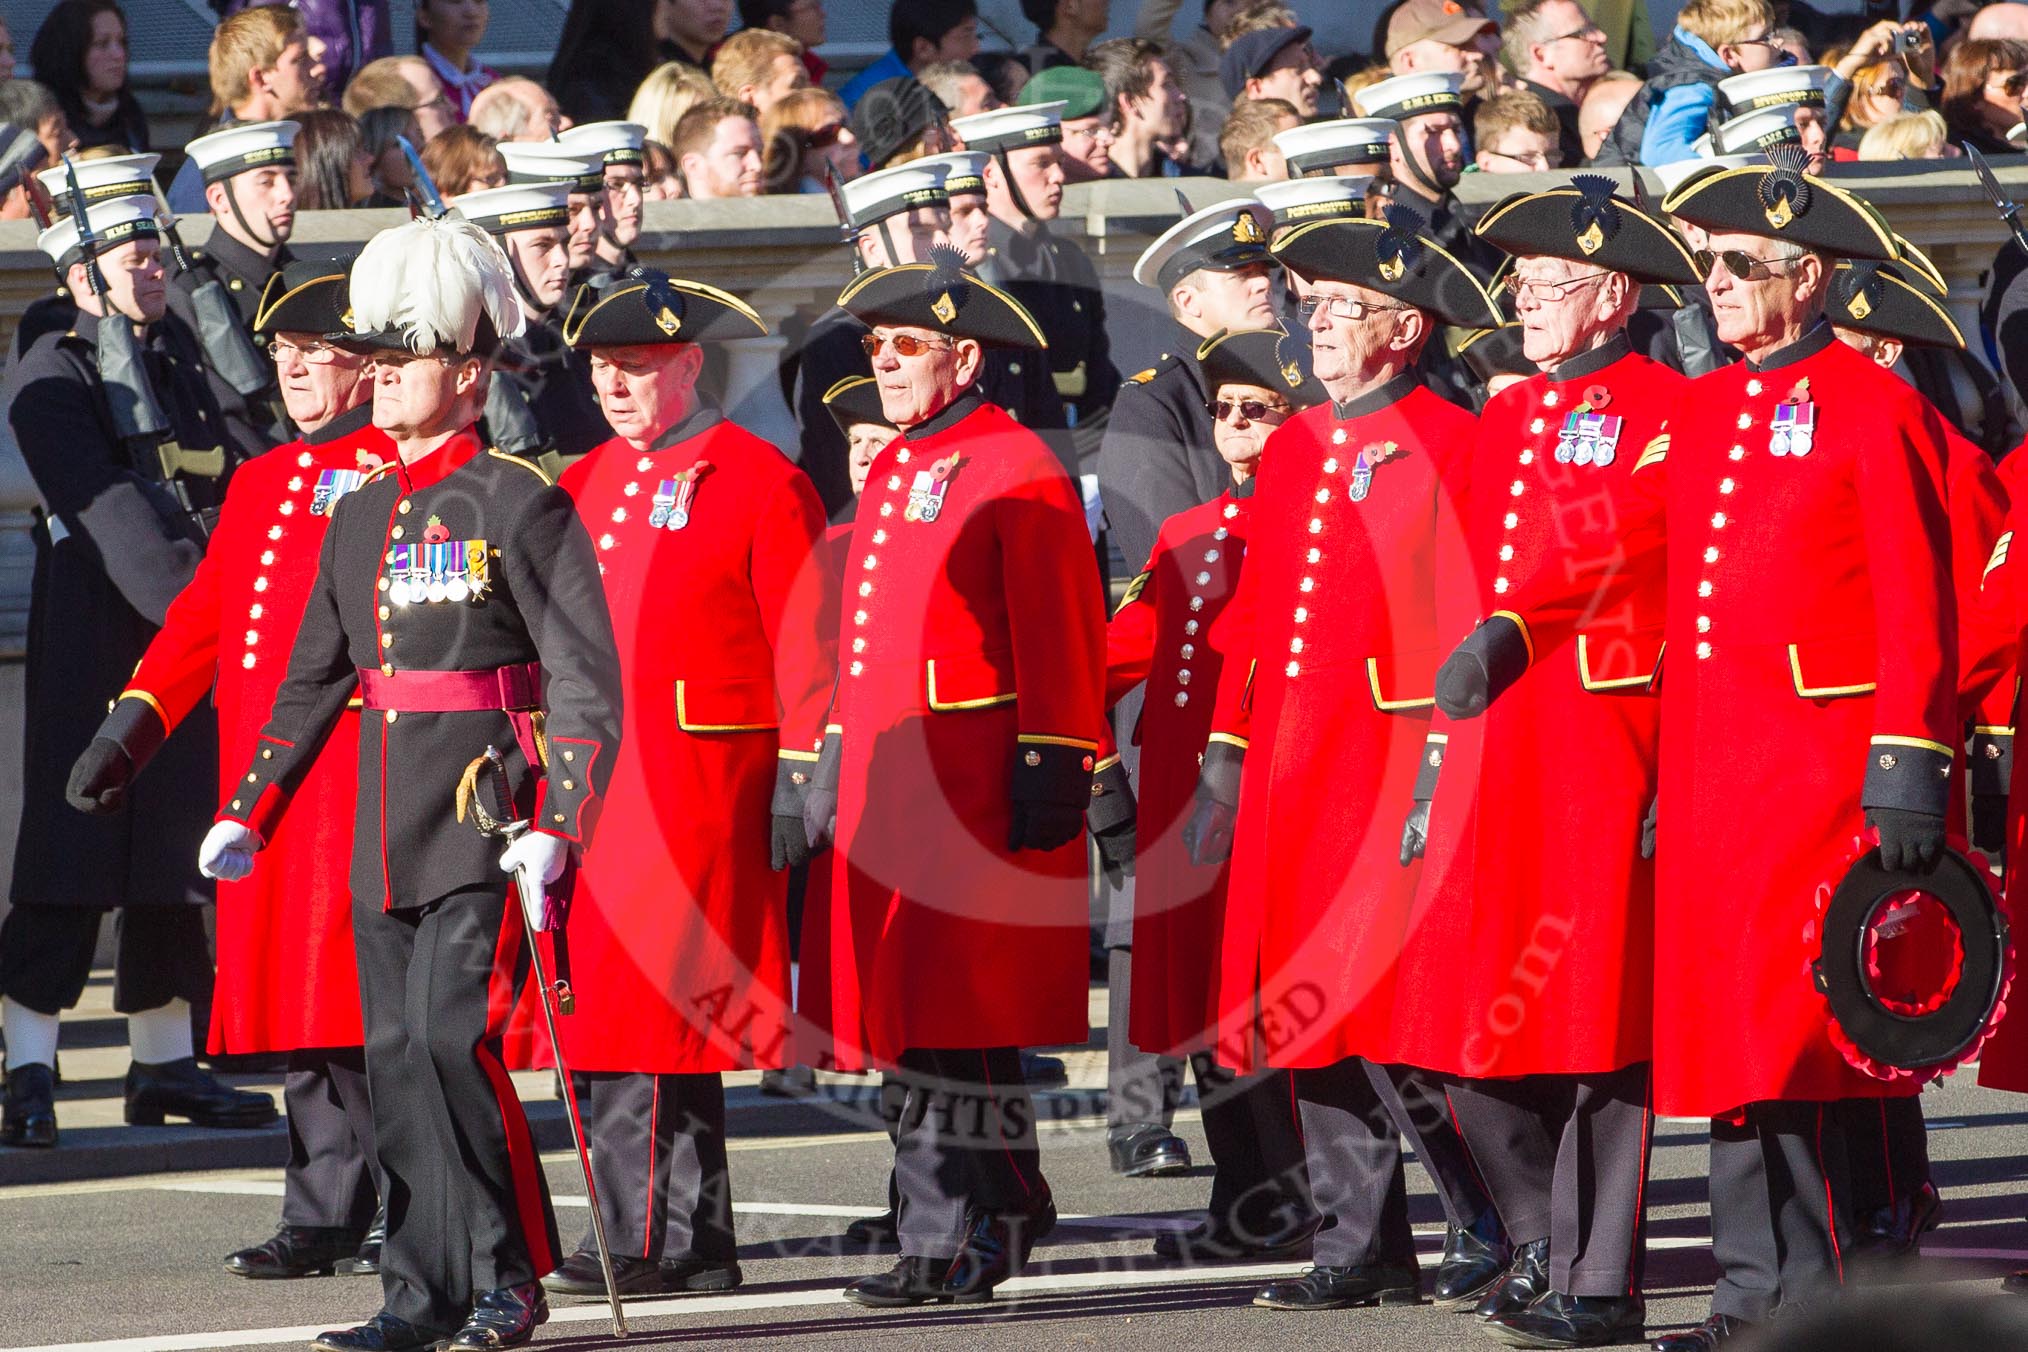 Remembrance Sunday 2012 Cenotaph March Past: Group E43 - Royal Hospital, Chelsea (Chelsea Pensioners)..
Whitehall, Cenotaph,
London SW1,

United Kingdom,
on 11 November 2012 at 11:43, image #332